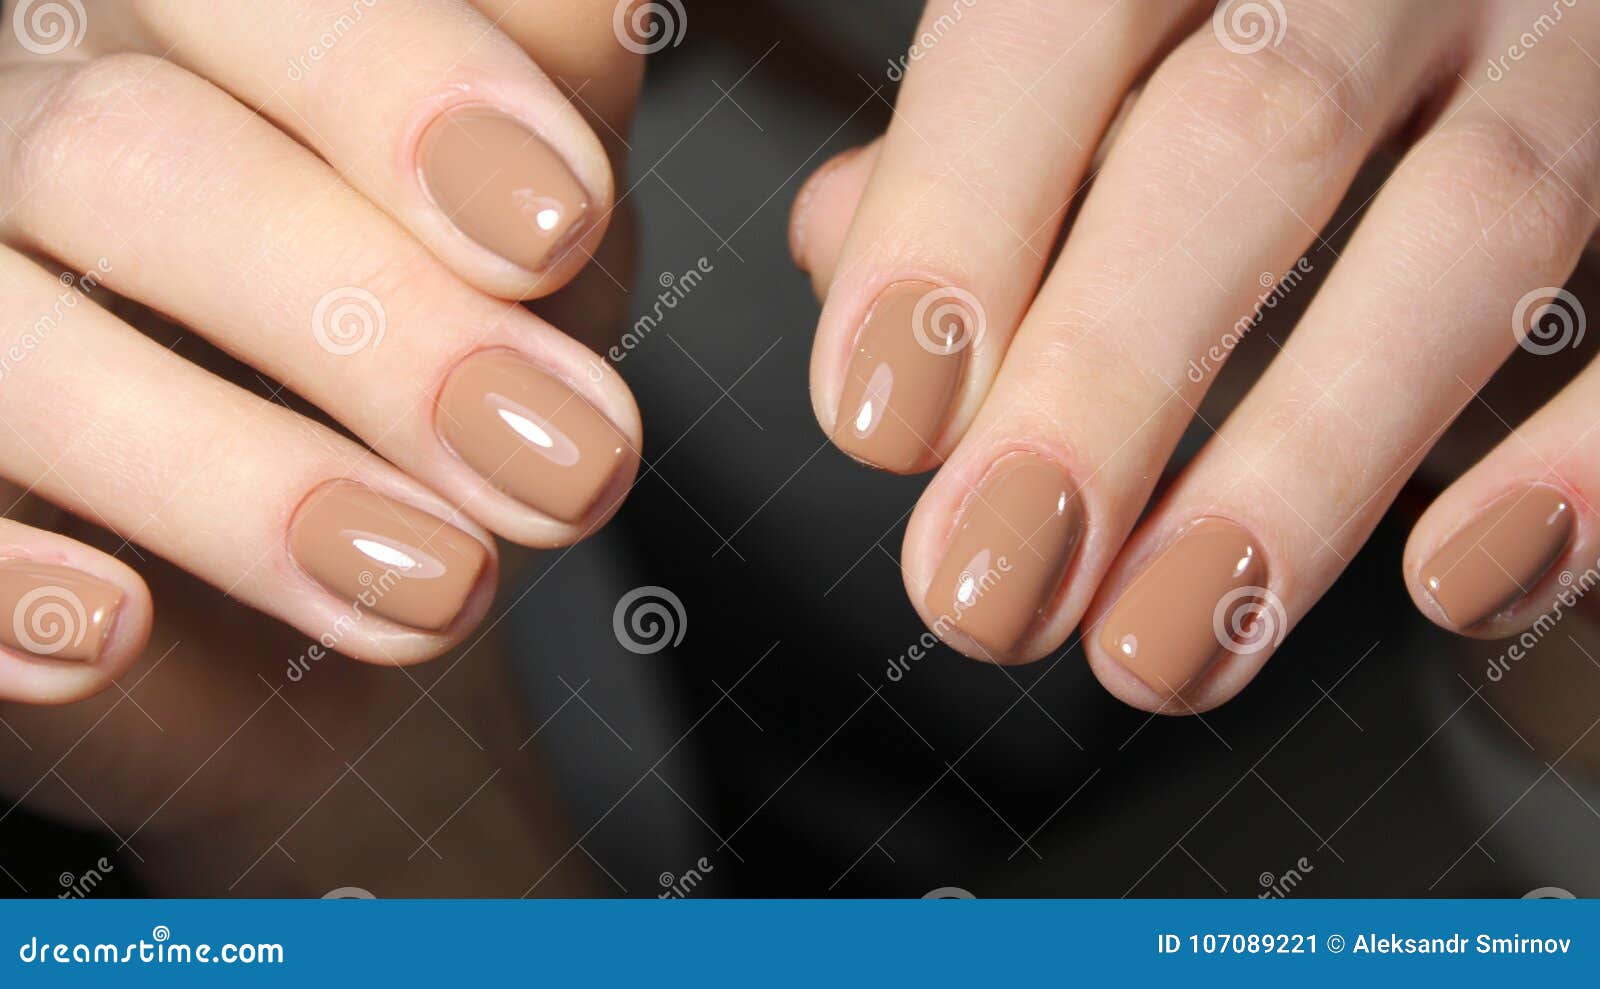 Taking care of your cuticles make all things easier for your nails